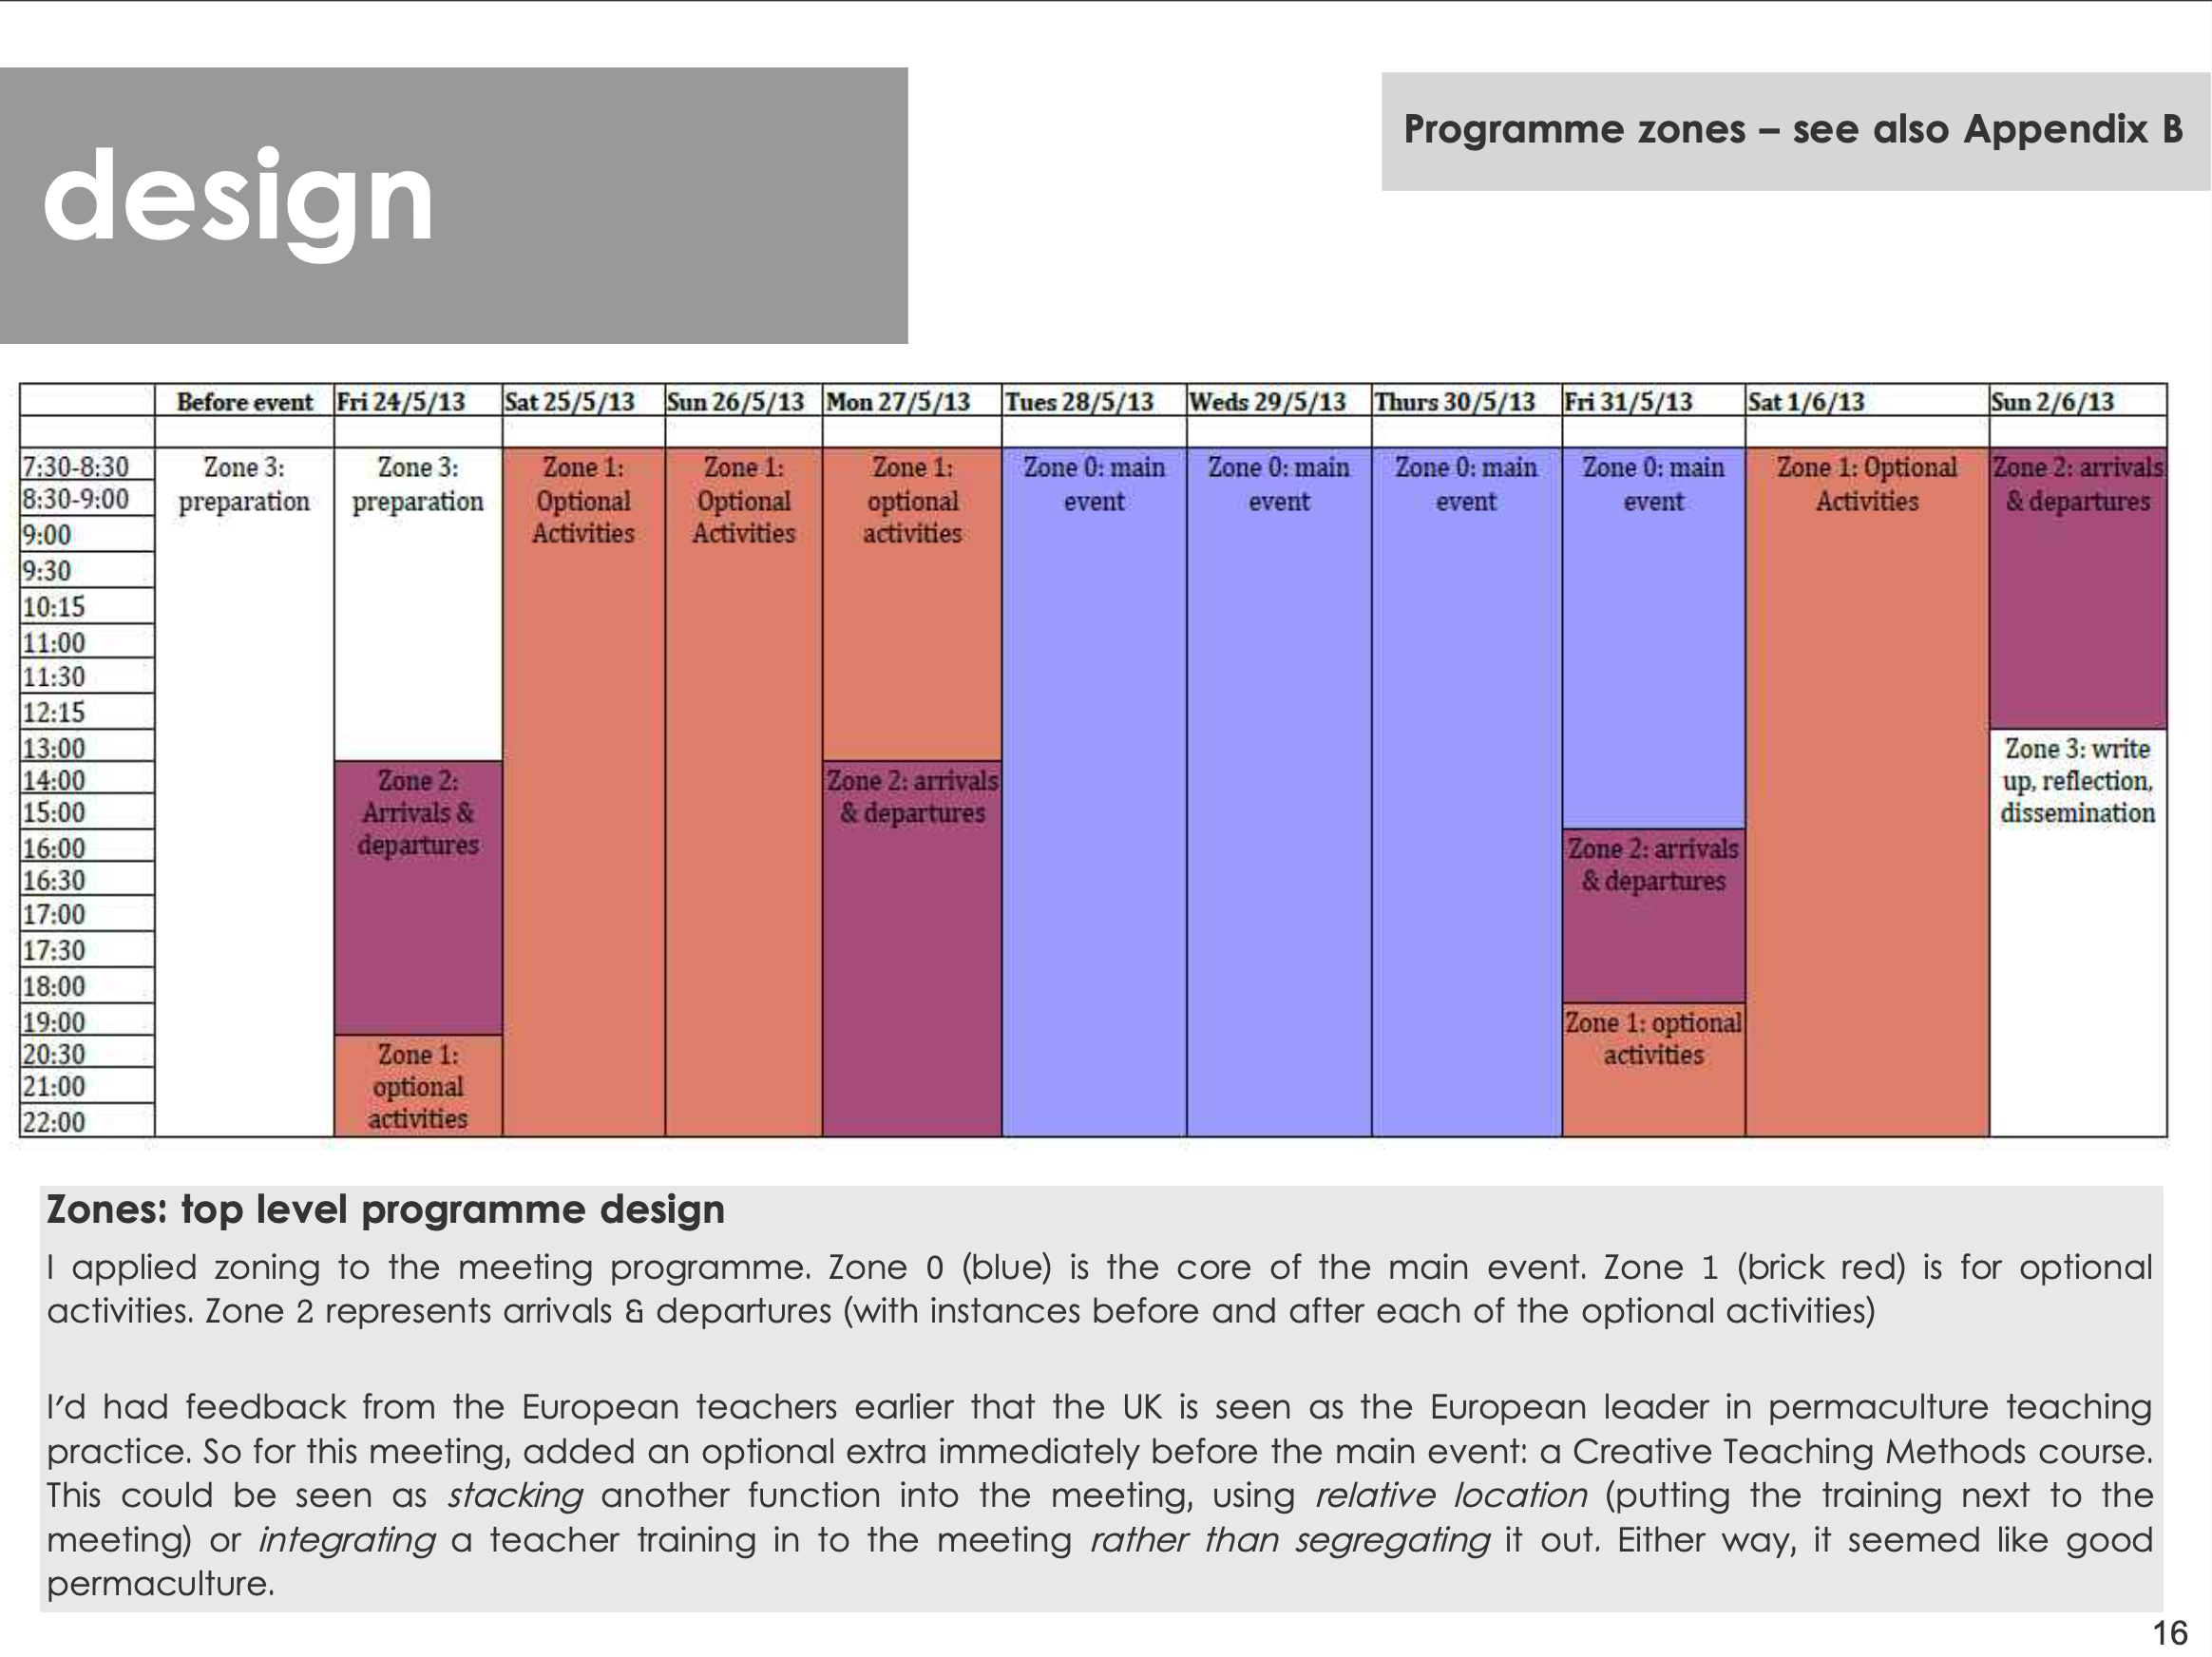 The programme for the meeting at pattern level.